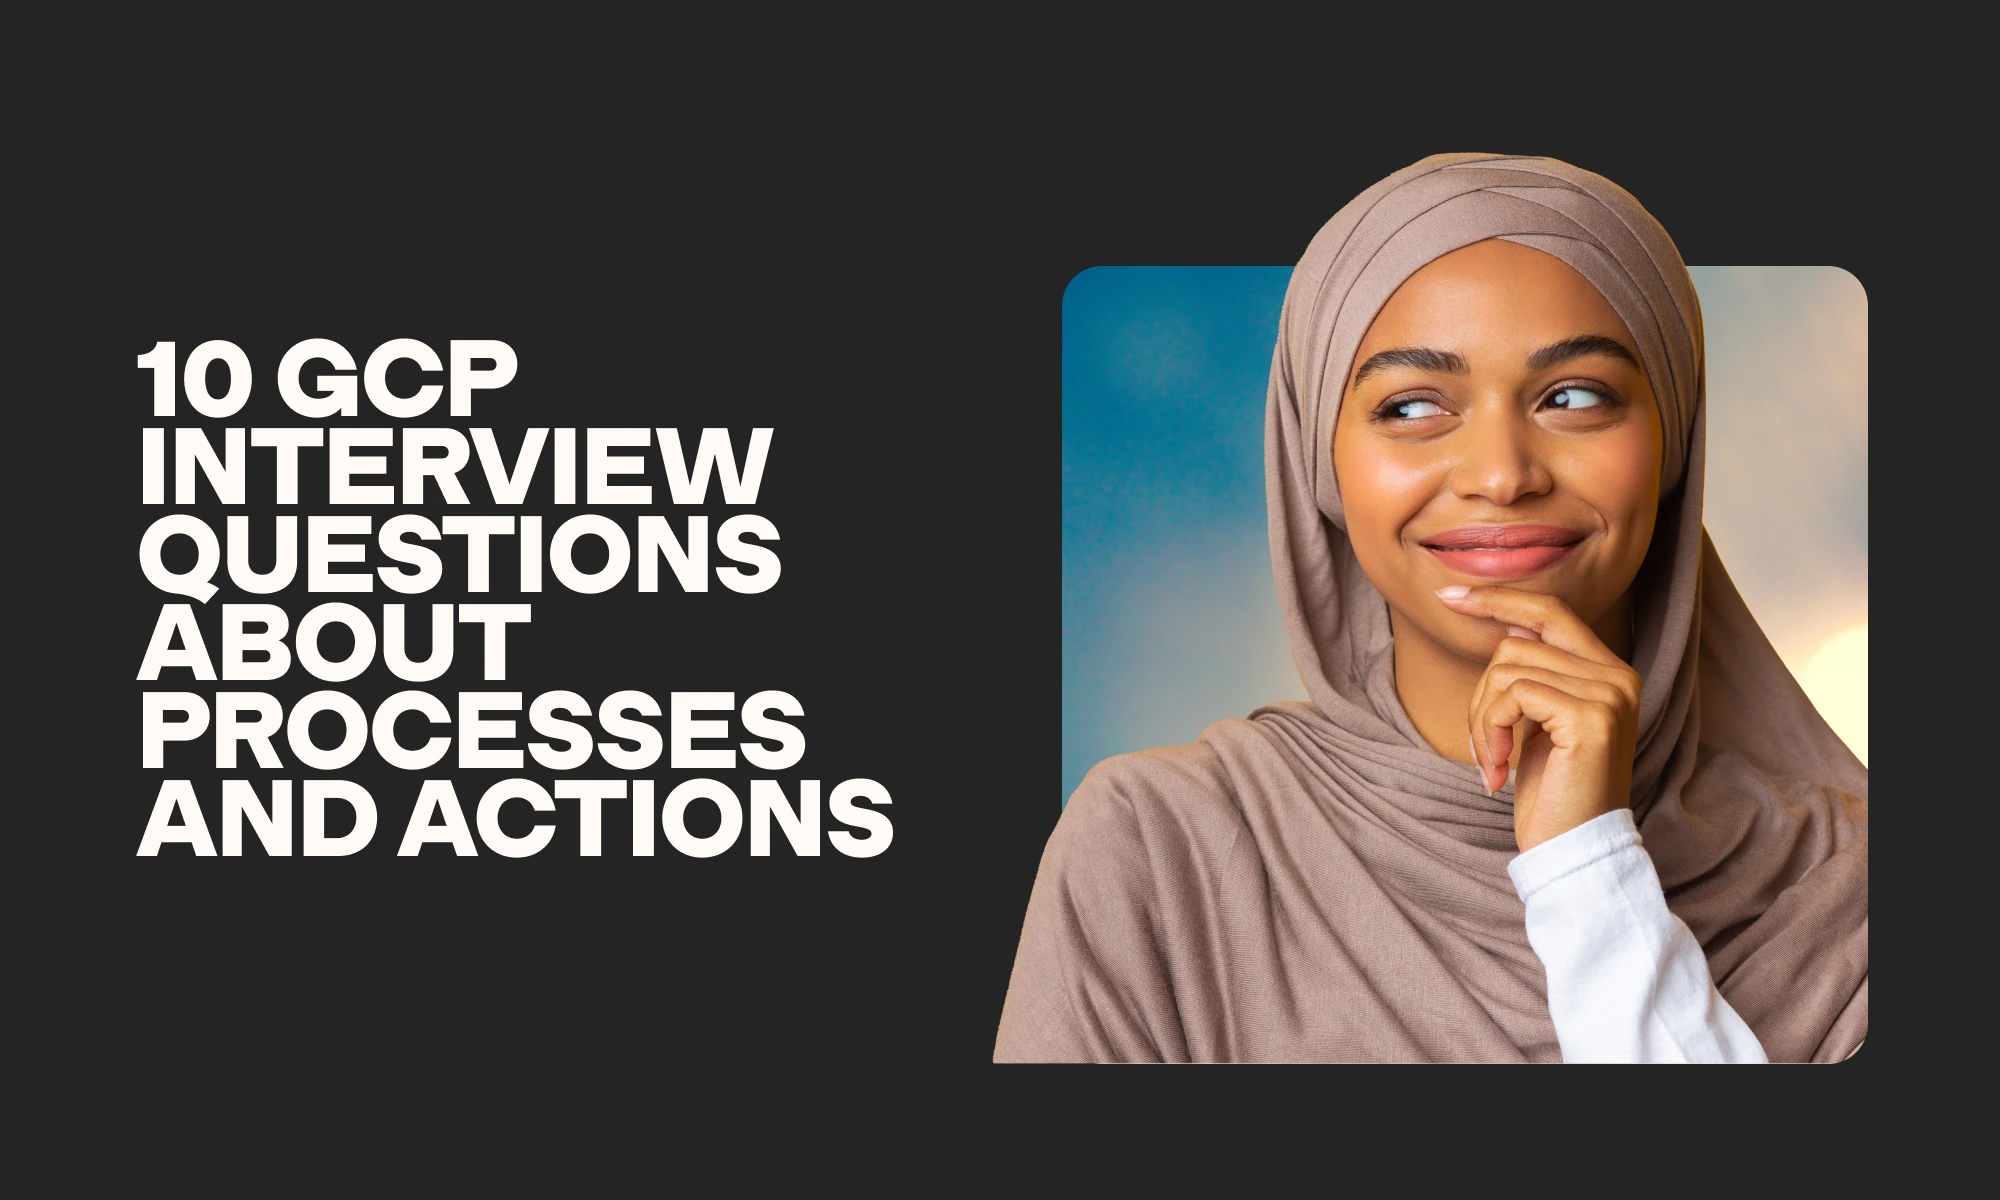 10 GCP interview questions about processes and actions to ask your interviewees 